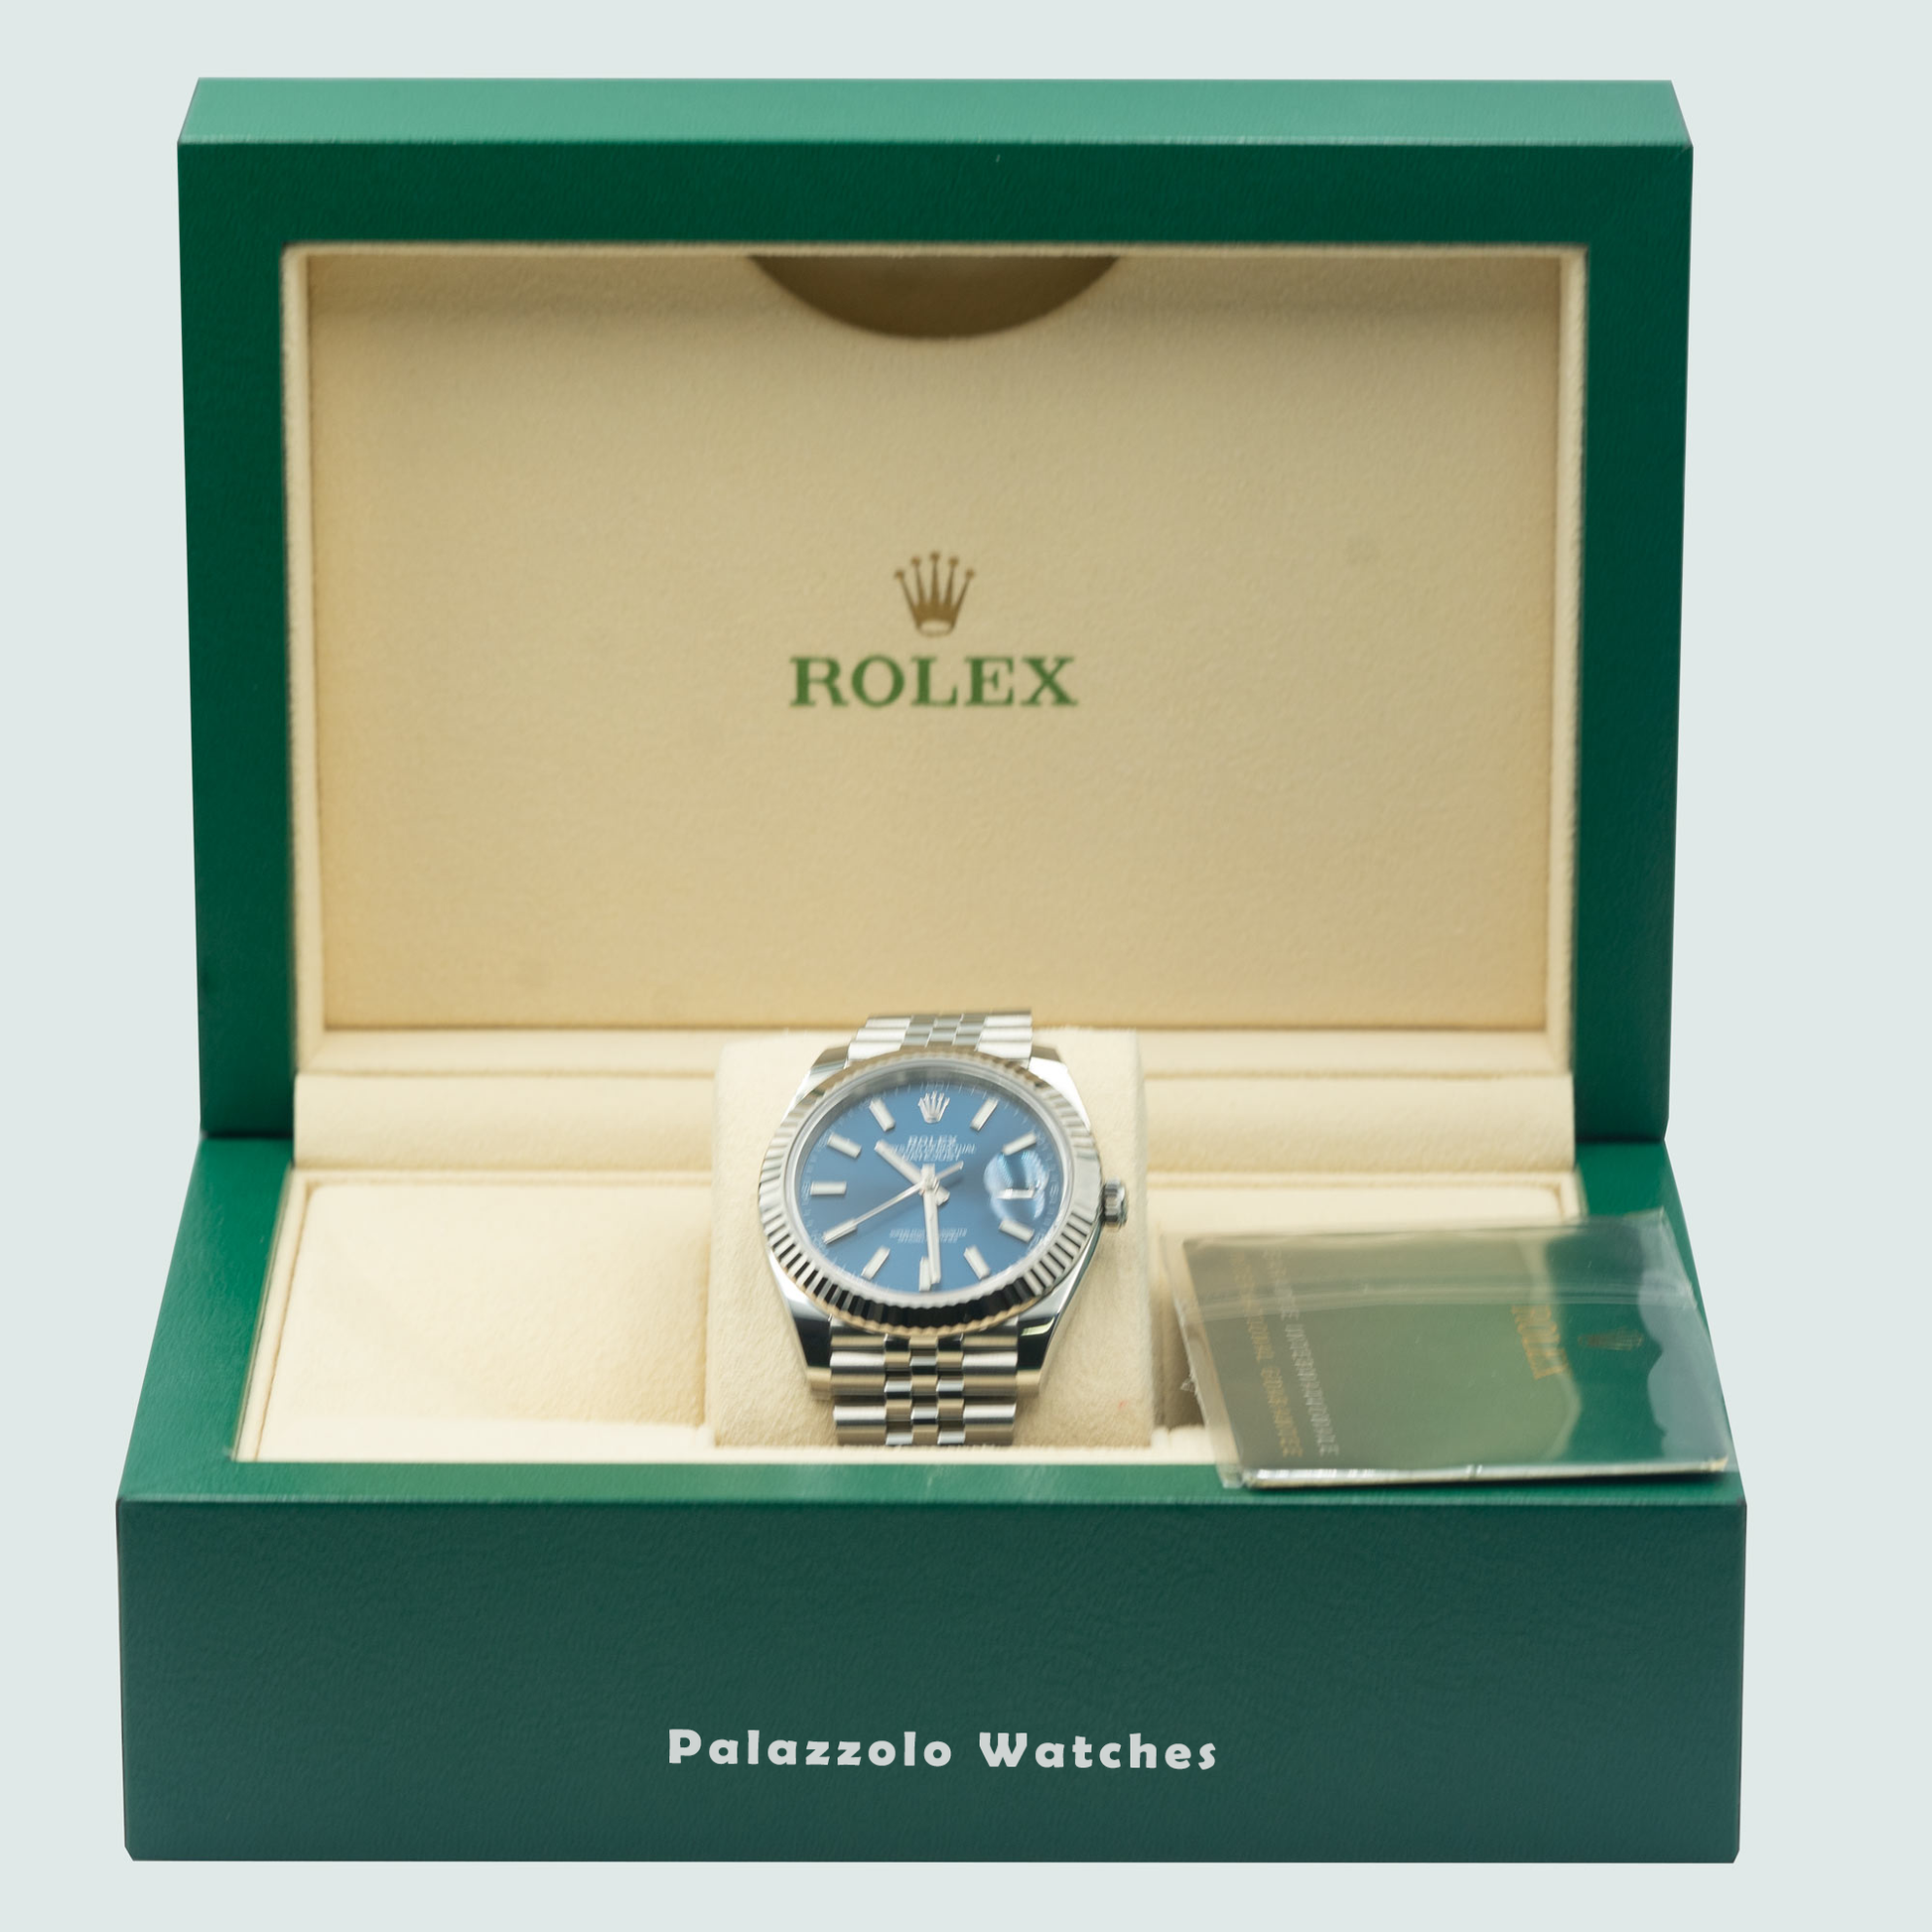 Rolex Datejust 41 Blue Dial with Fluted Bezel and Jubilee Bracelet - Palazzolo Watches